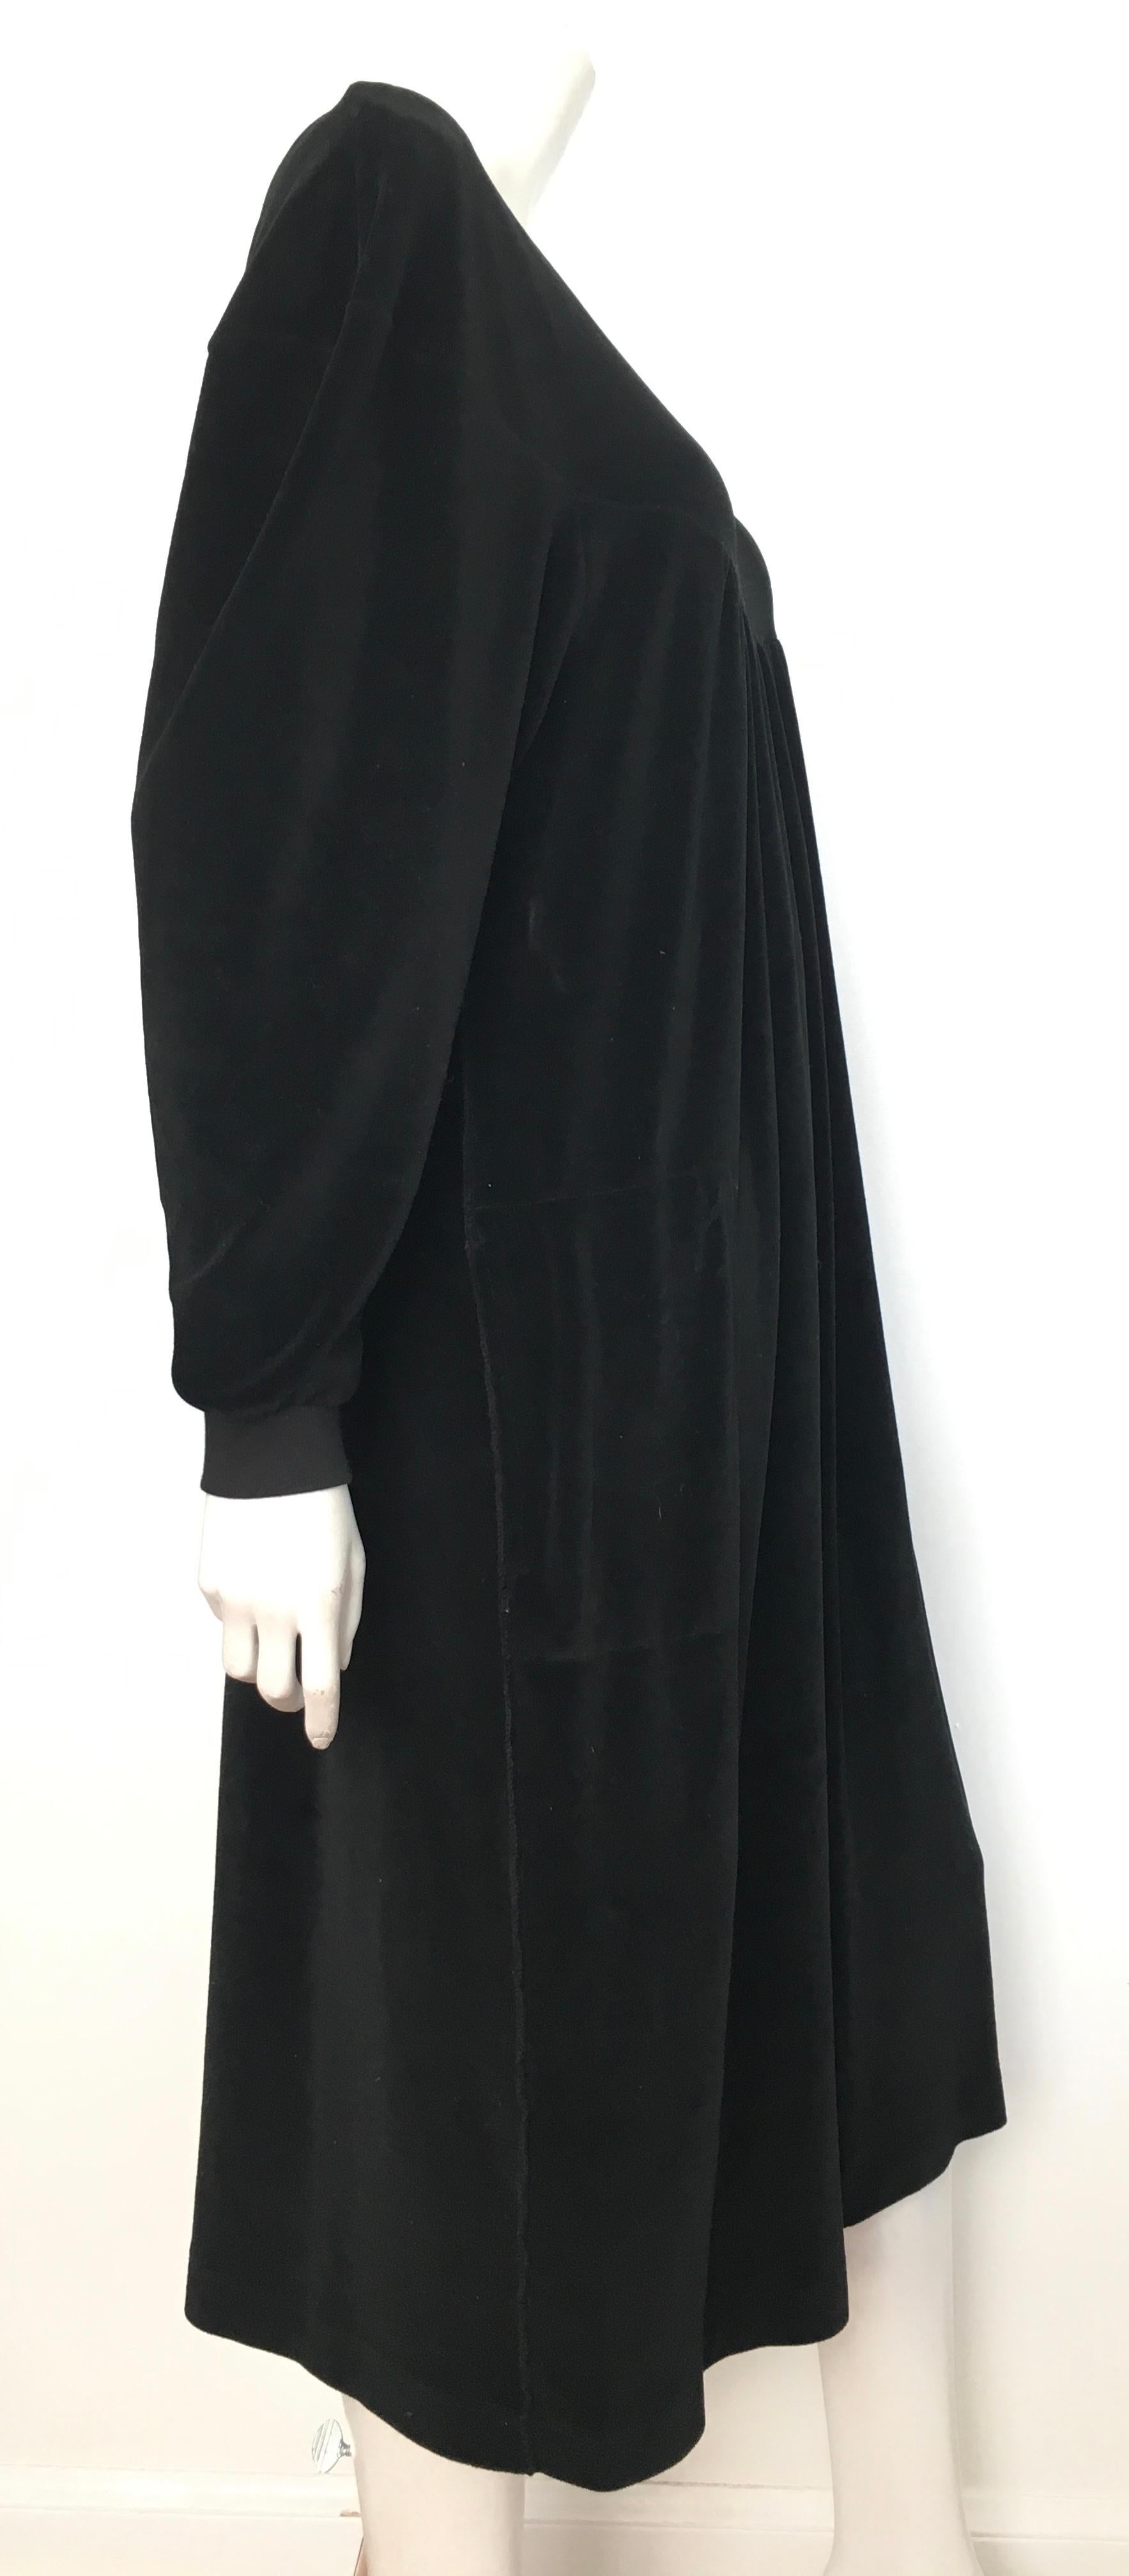 Sonia Rykiel 1980s Black Velour Dress with Pockets & Cardigan Size Large. For Sale 3